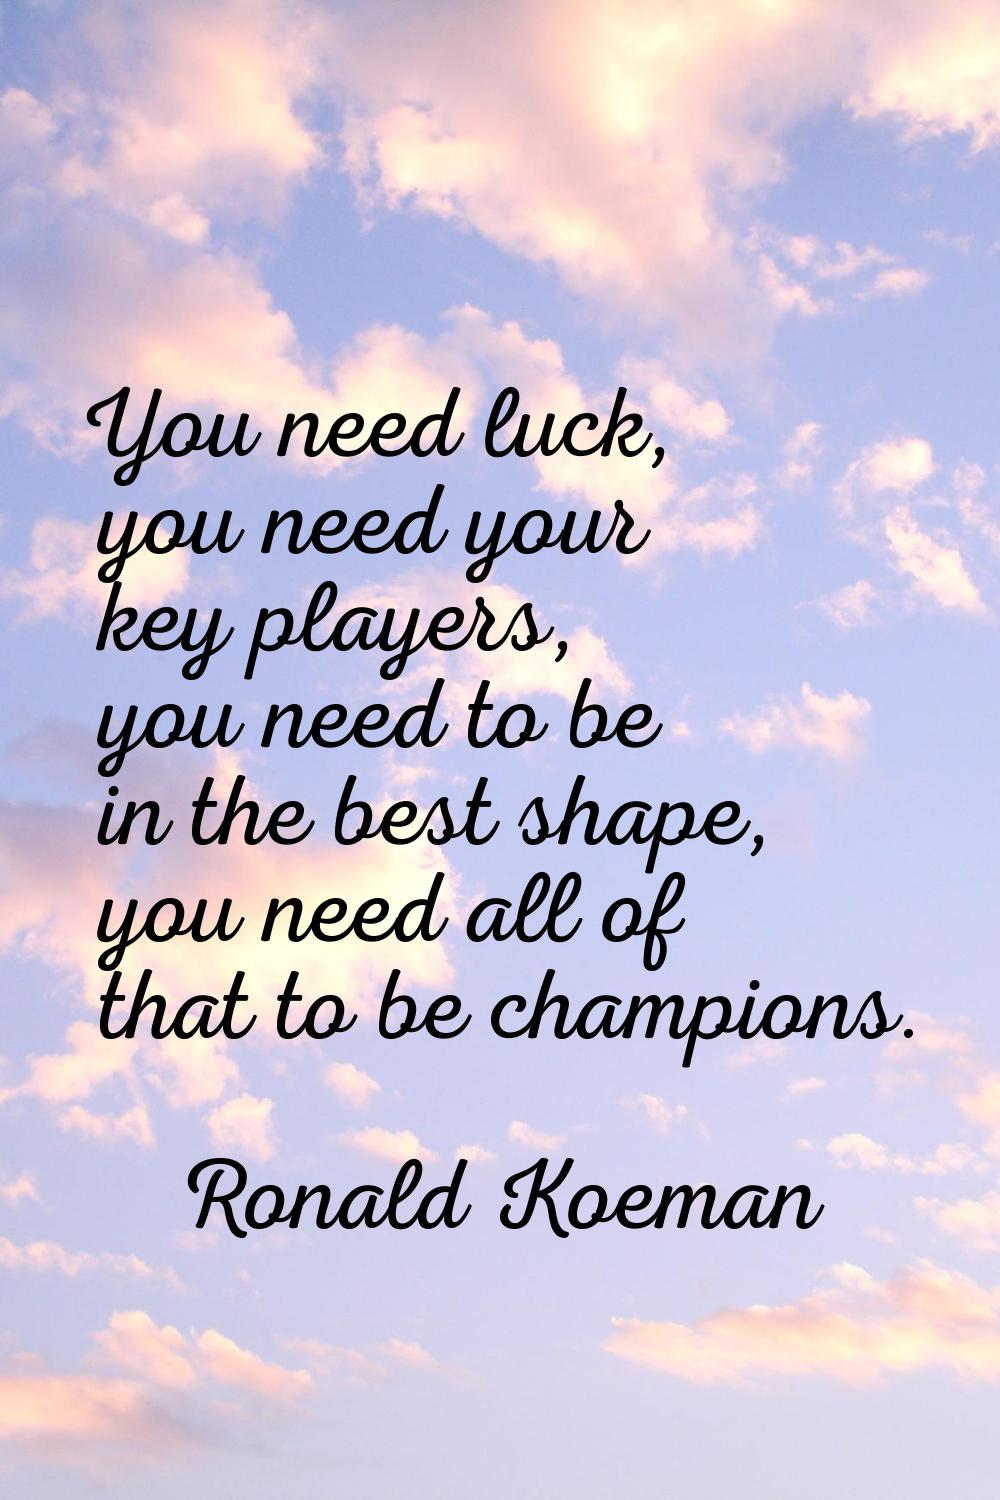 You need luck, you need your key players, you need to be in the best shape, you need all of that to